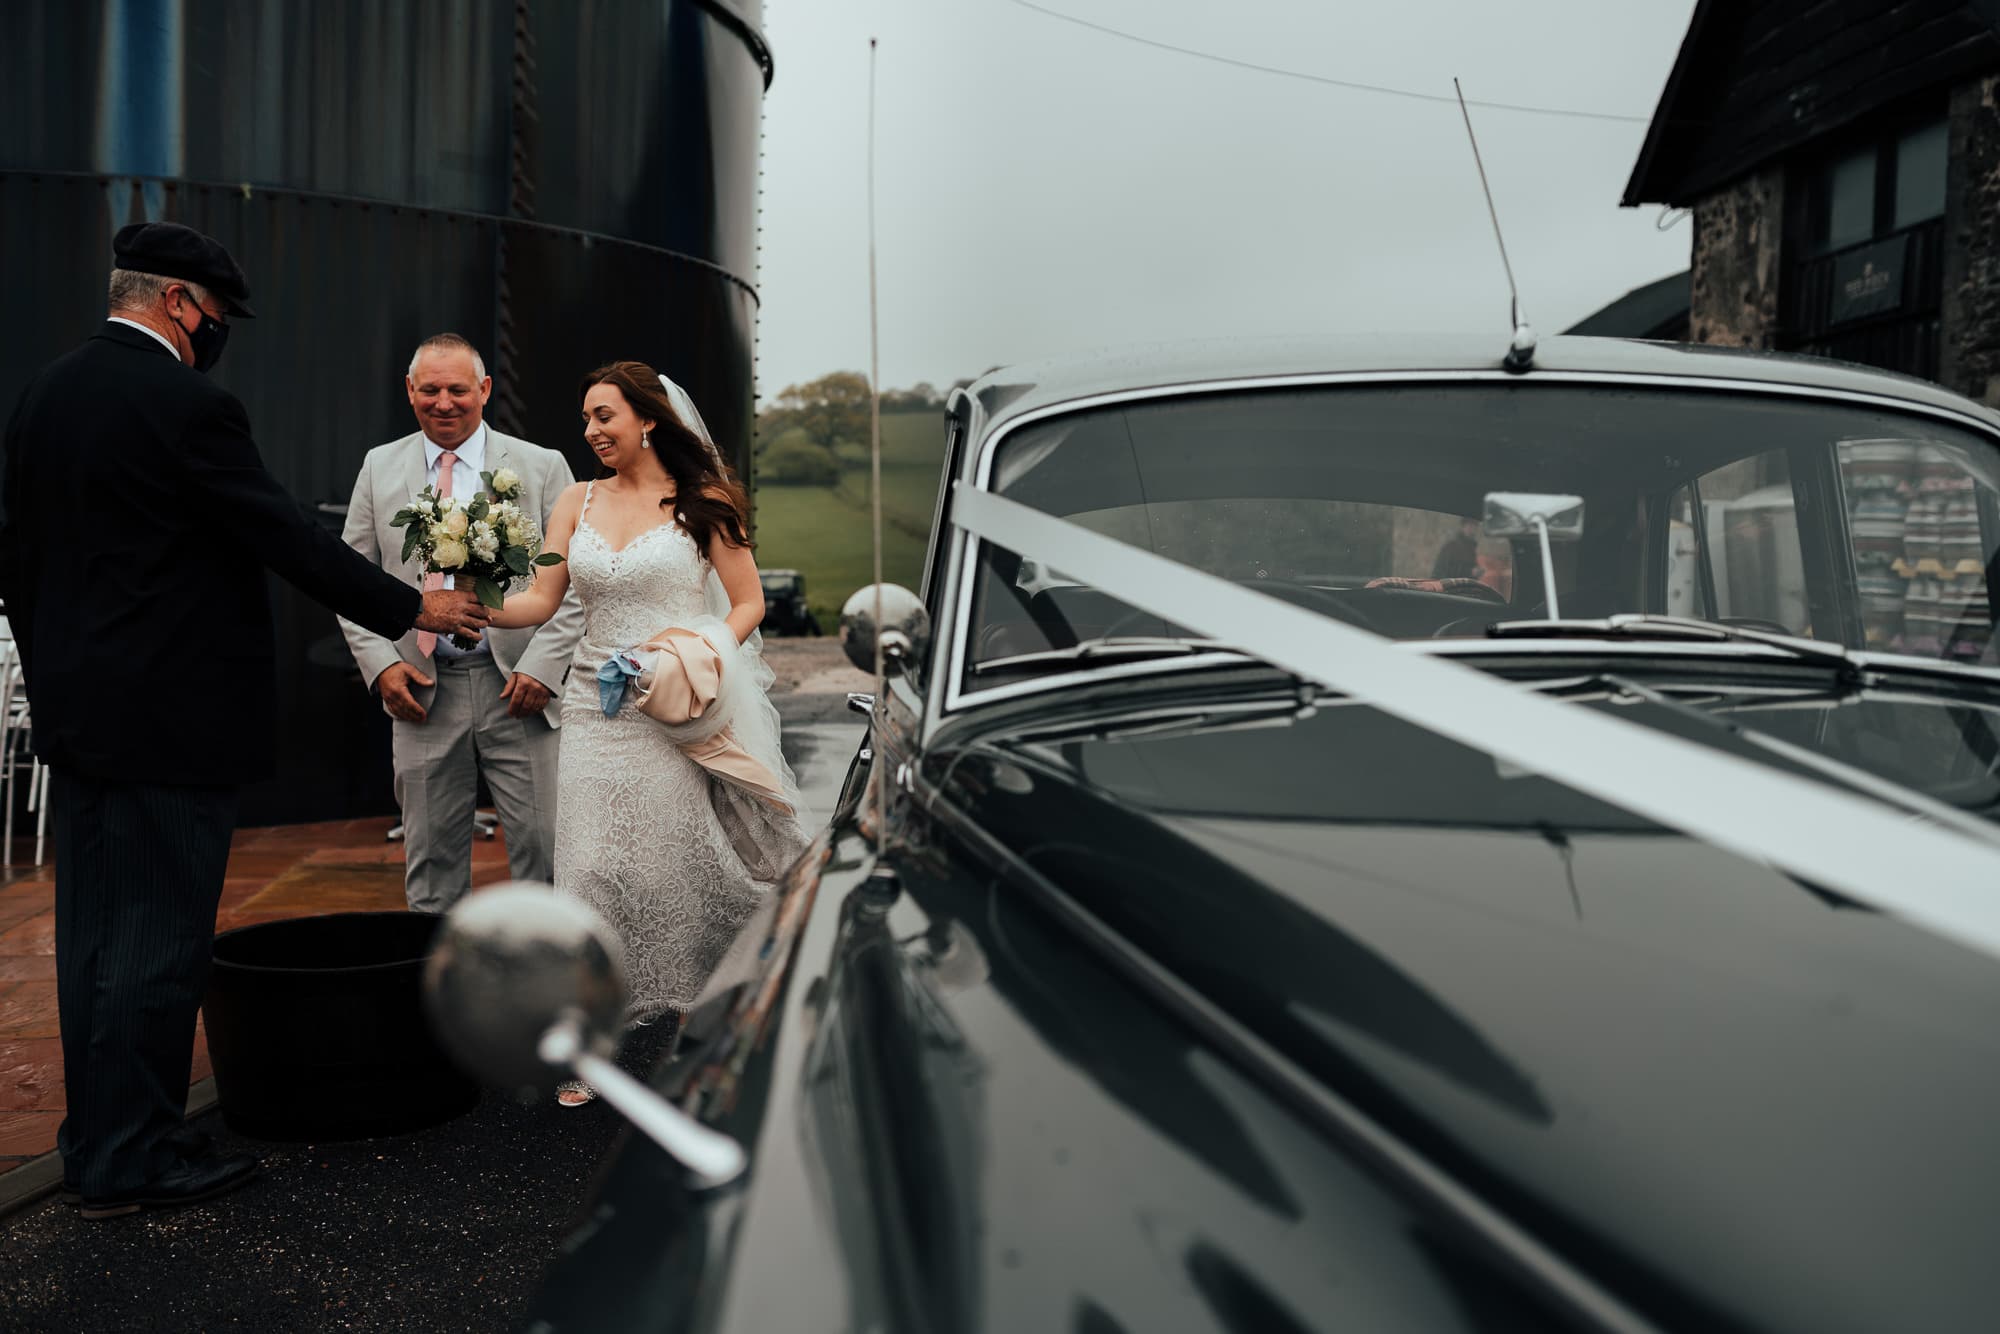 Wedding Photography at Humber Barn Wildly in Love